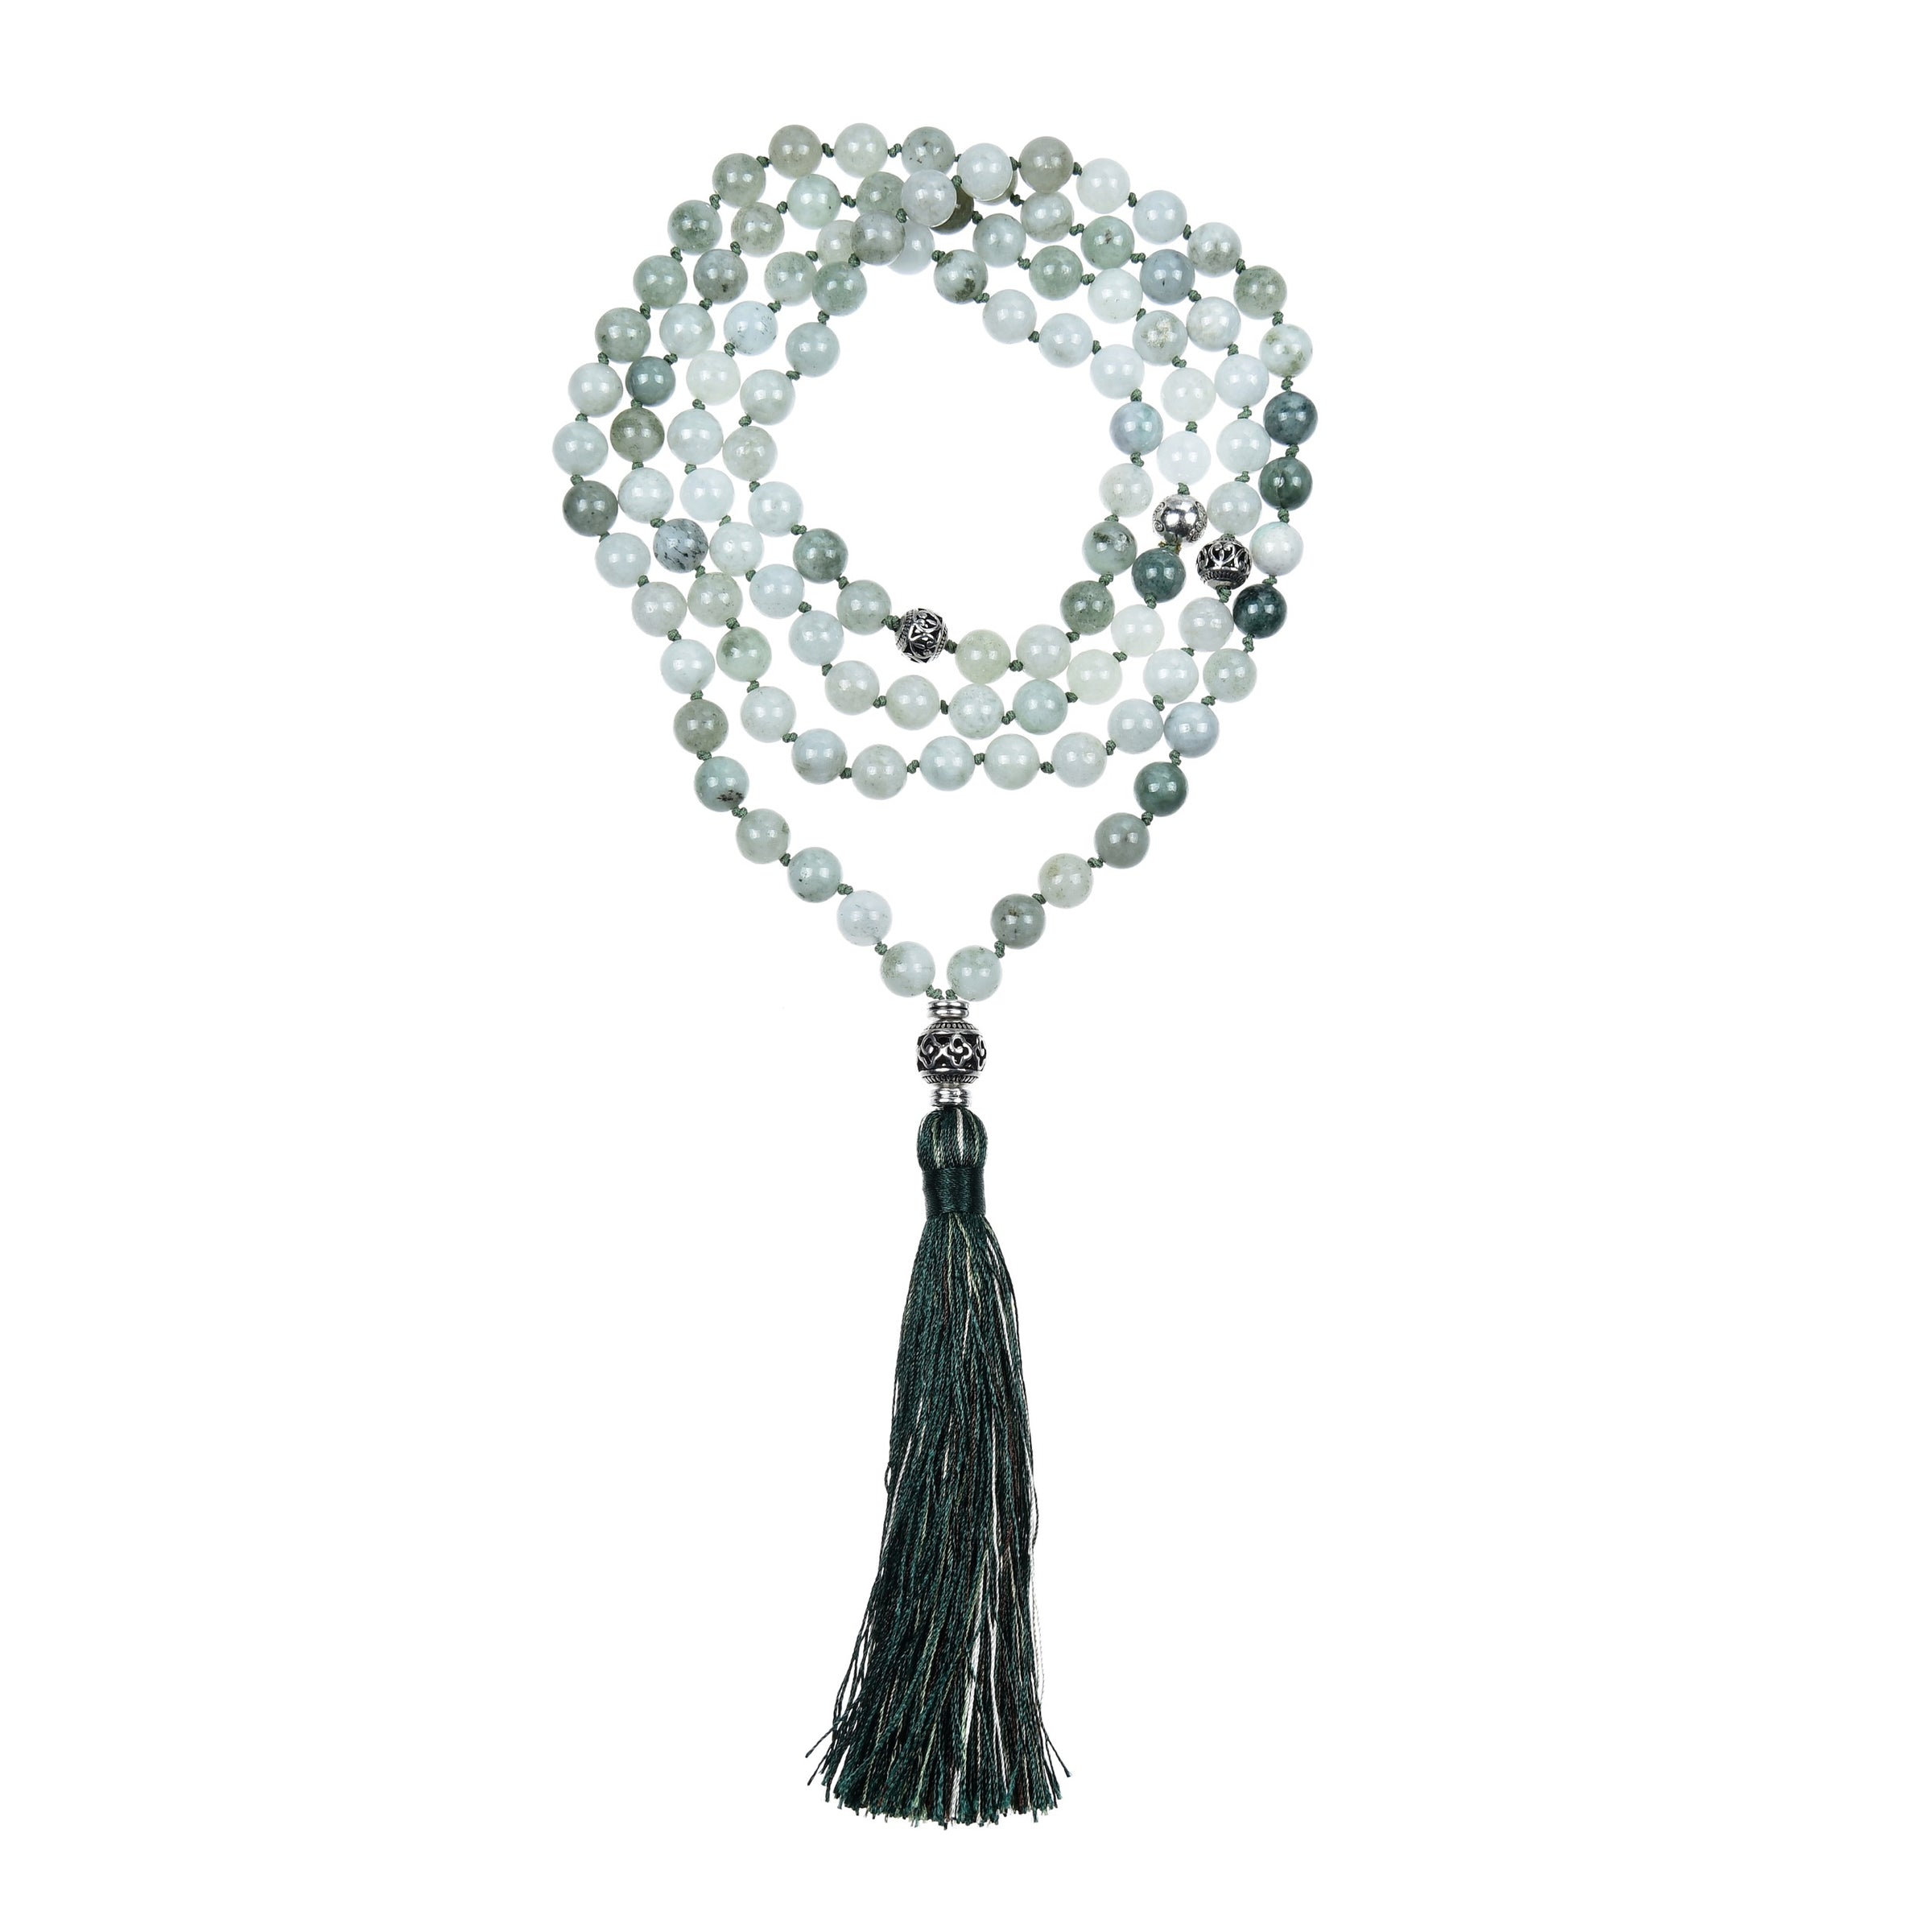 Mala Necklace | 108 Hand-Knotted 8mm Round Beads (Burma Jade)